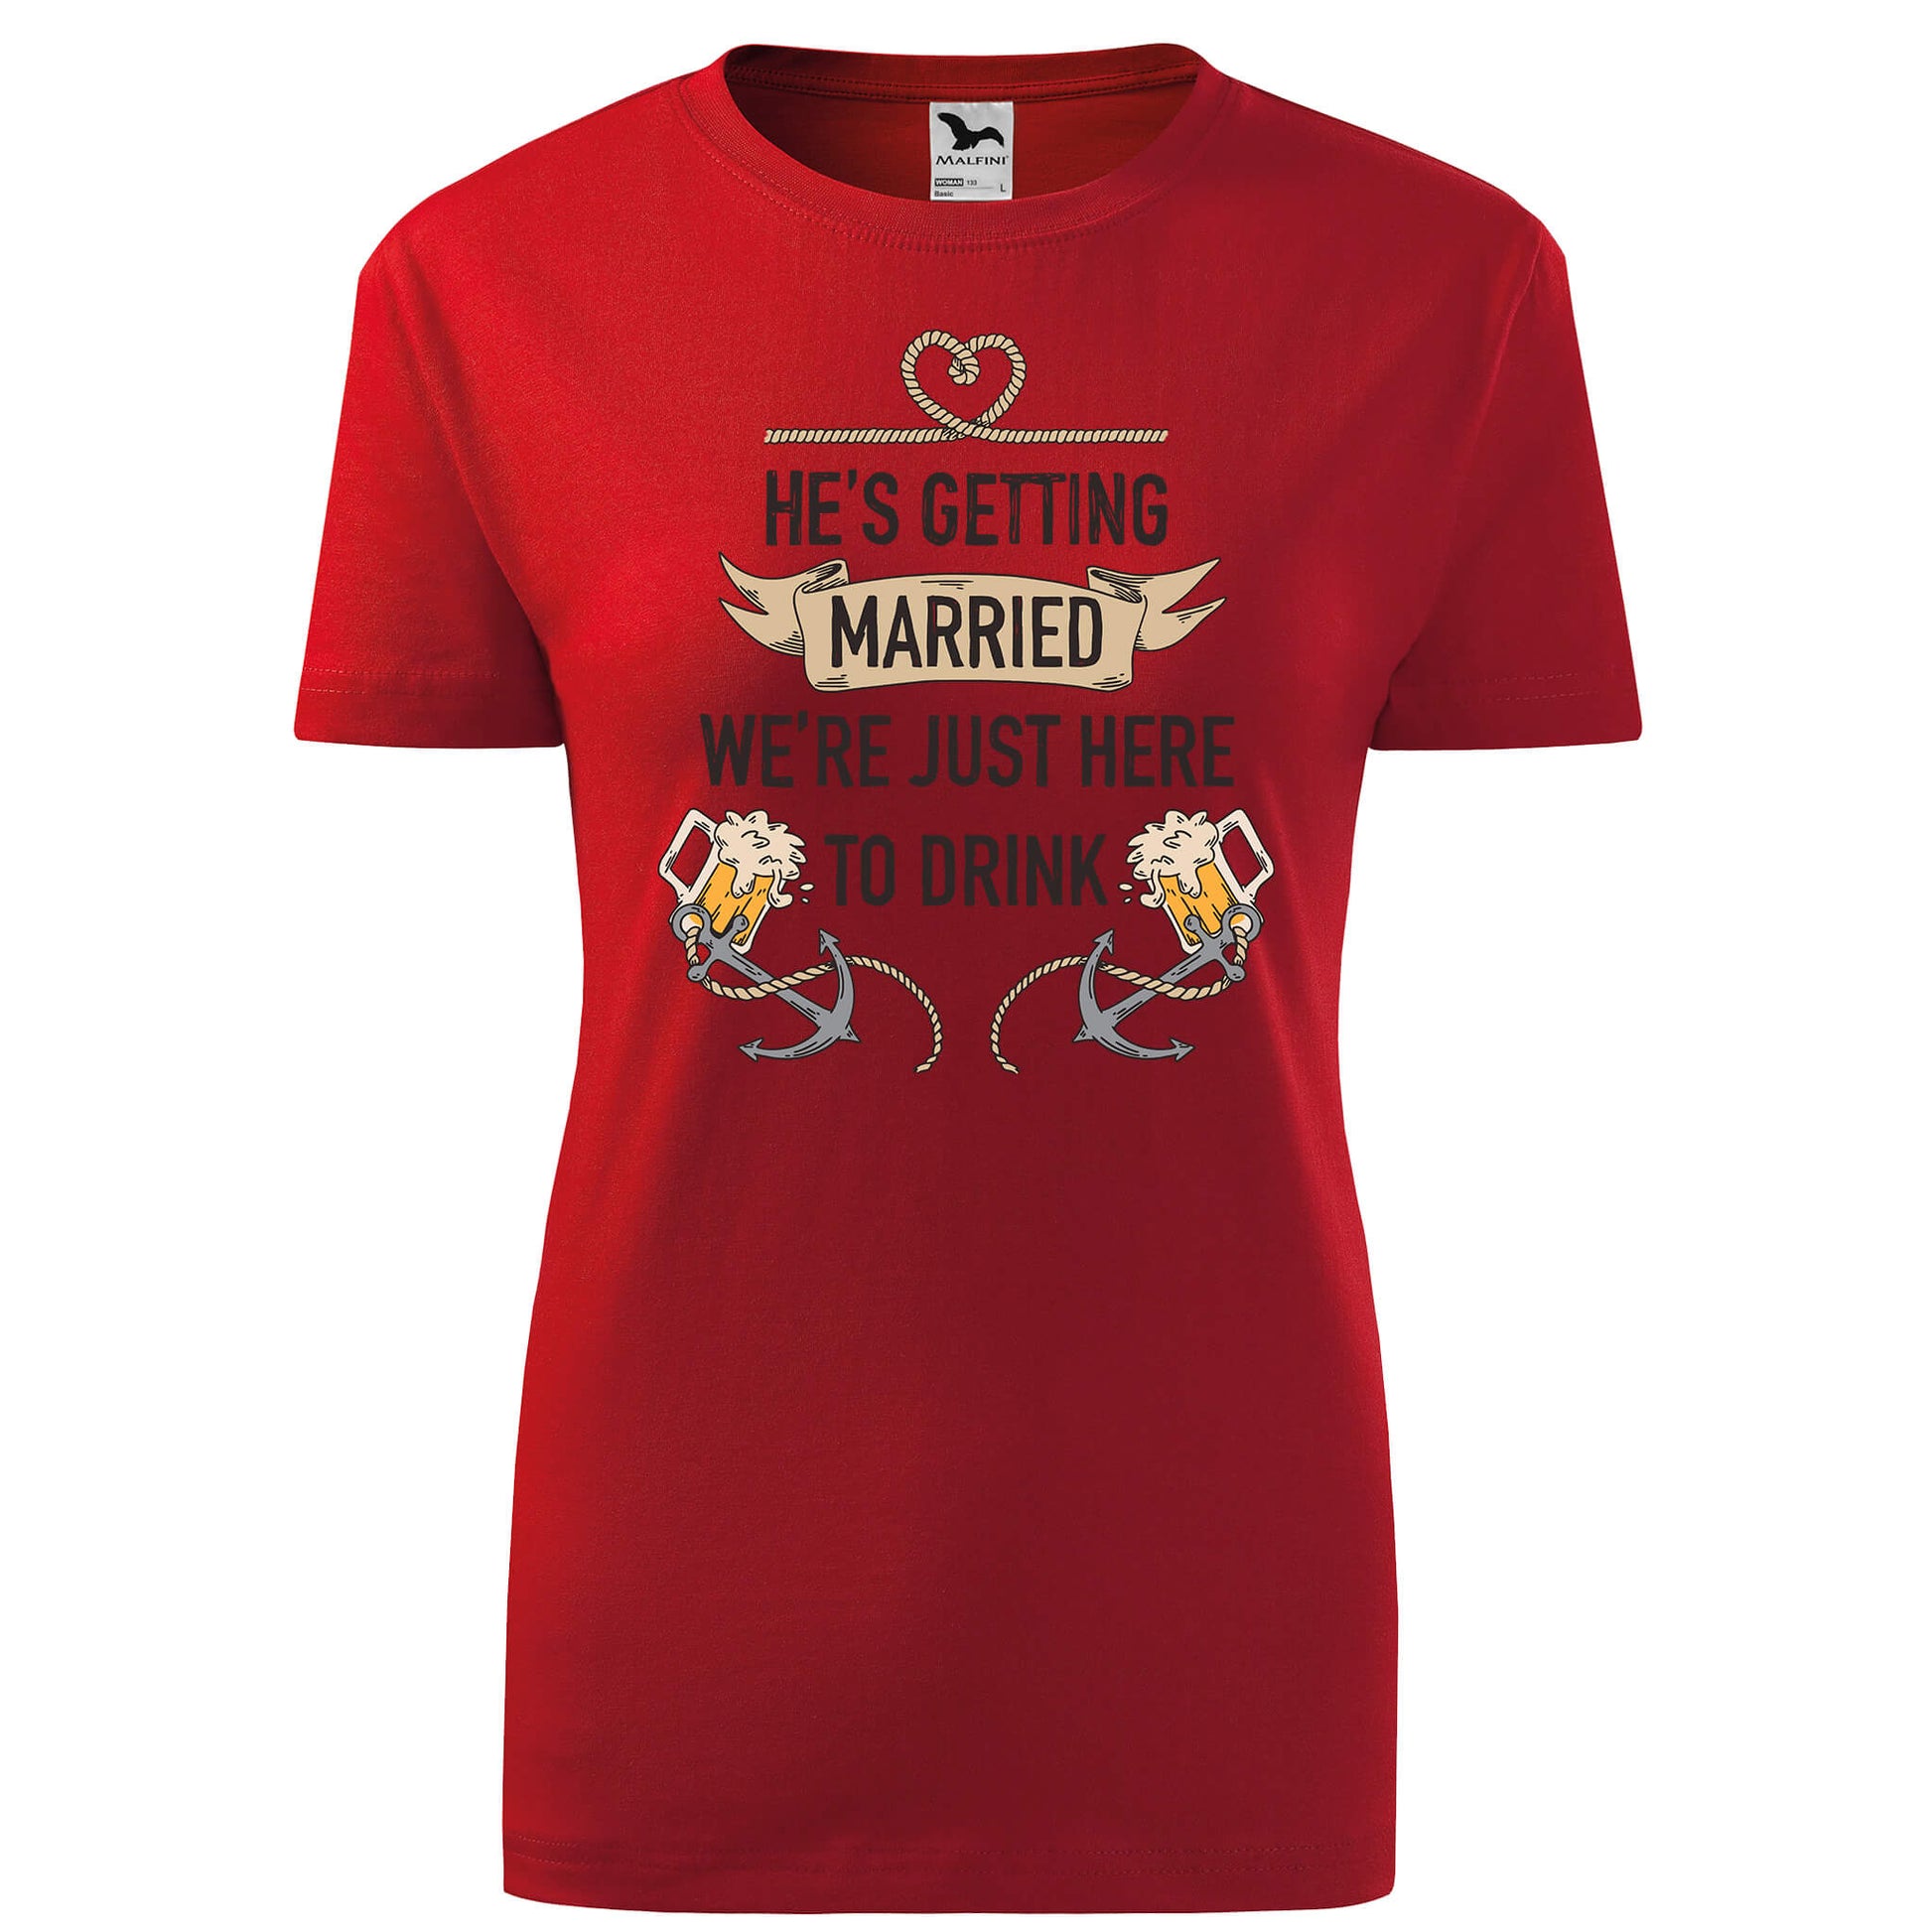 Hes getting married t-shirt - rvdesignprint